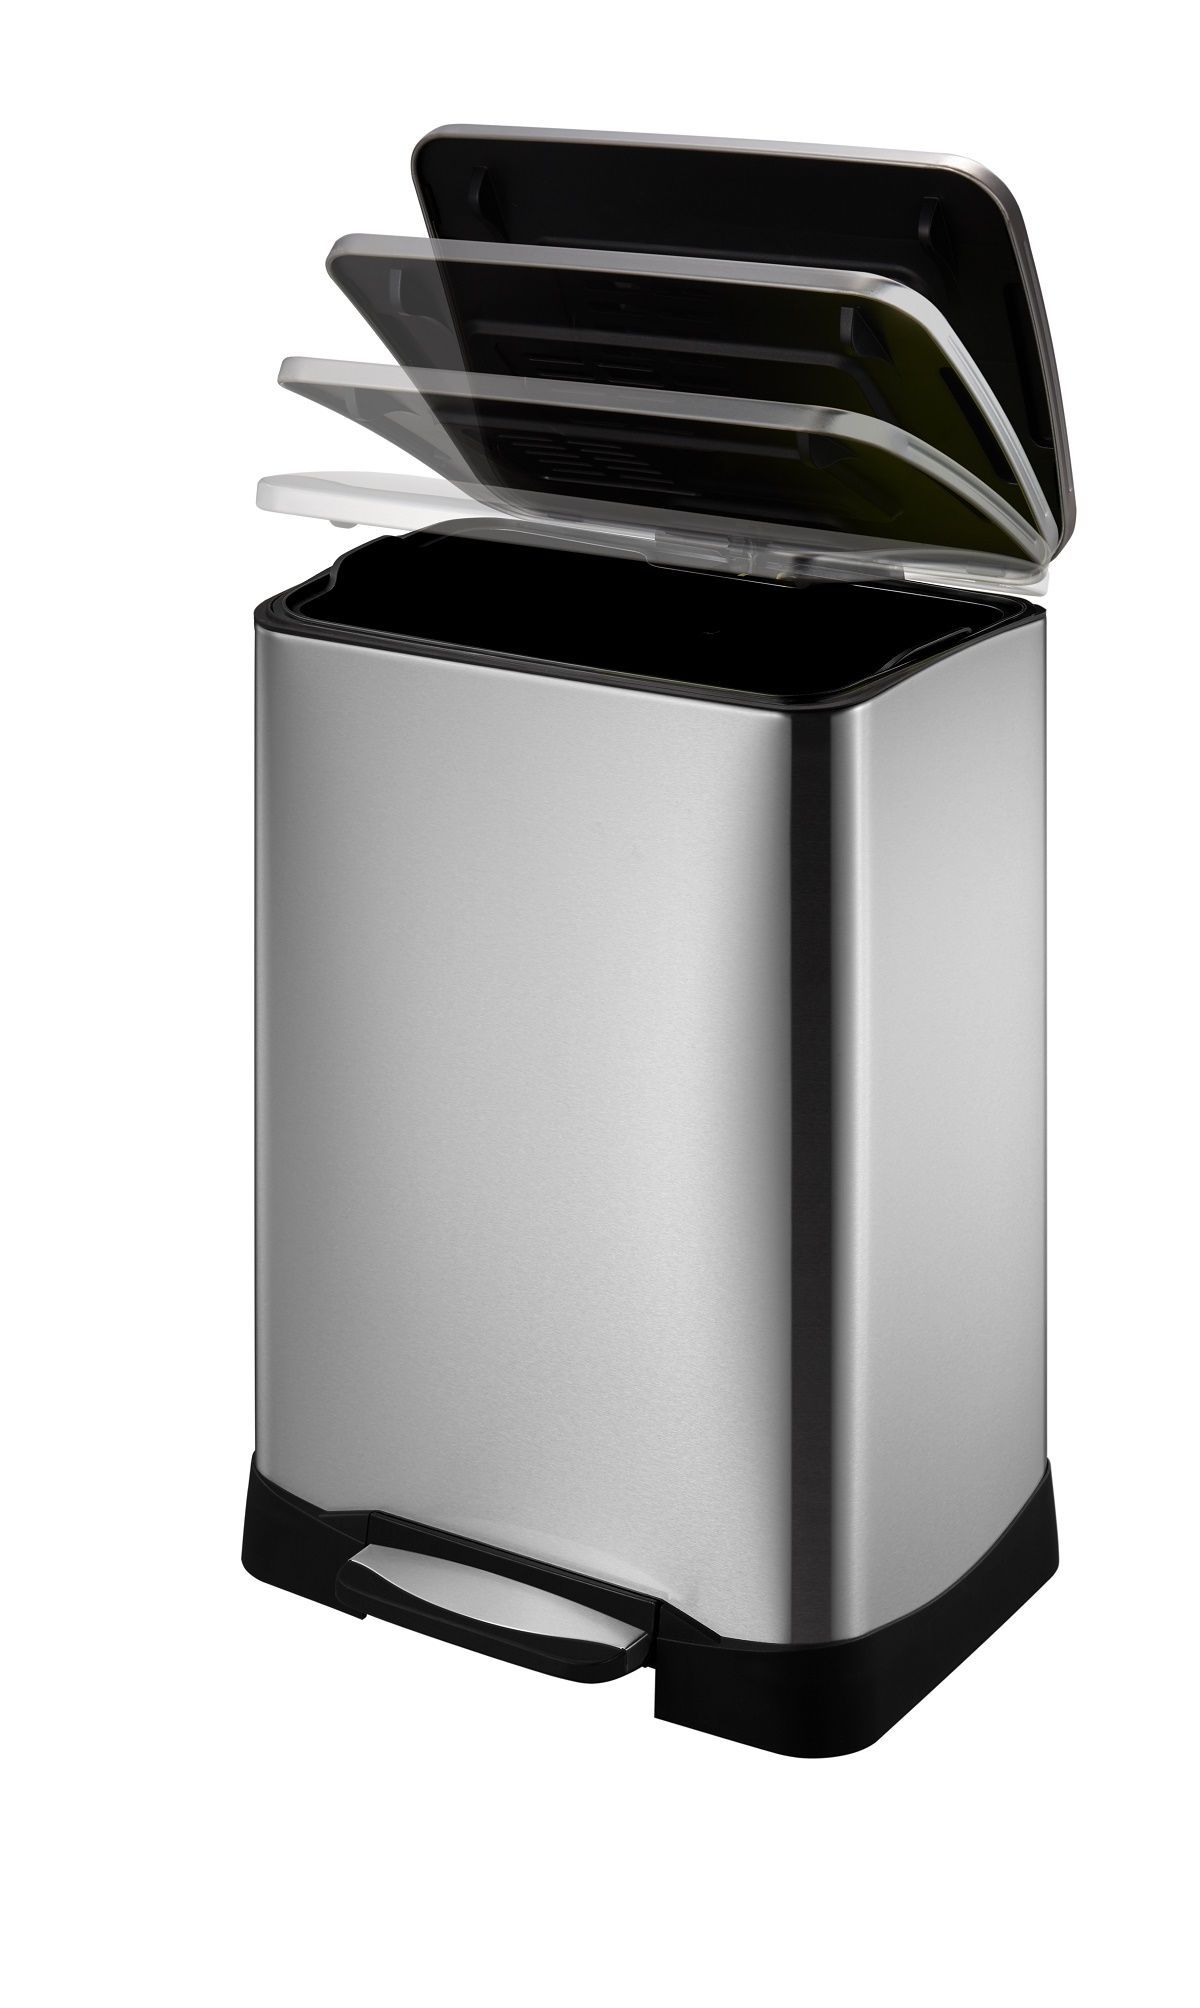 Neocube 50 Liter Brushed Stainless Steel Trash Can (C) Fingerprint Neocube 50 Liter Stainless Steel Trash Can